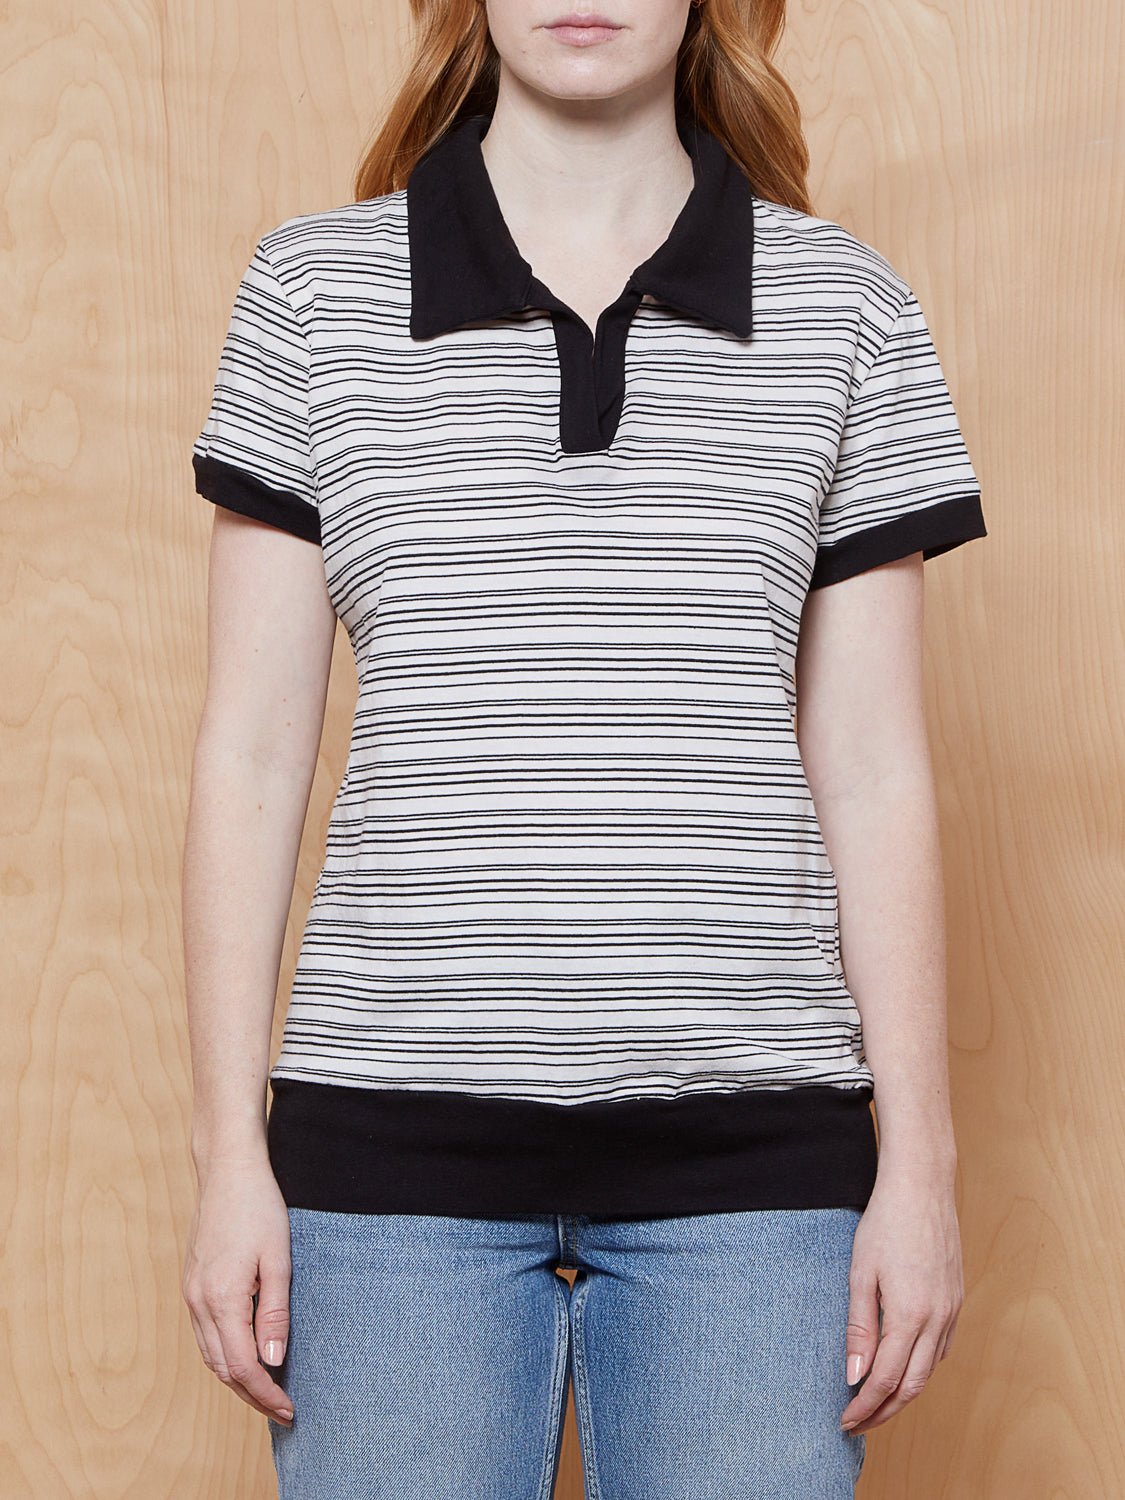 Camp Collection Striped Collared Shirt